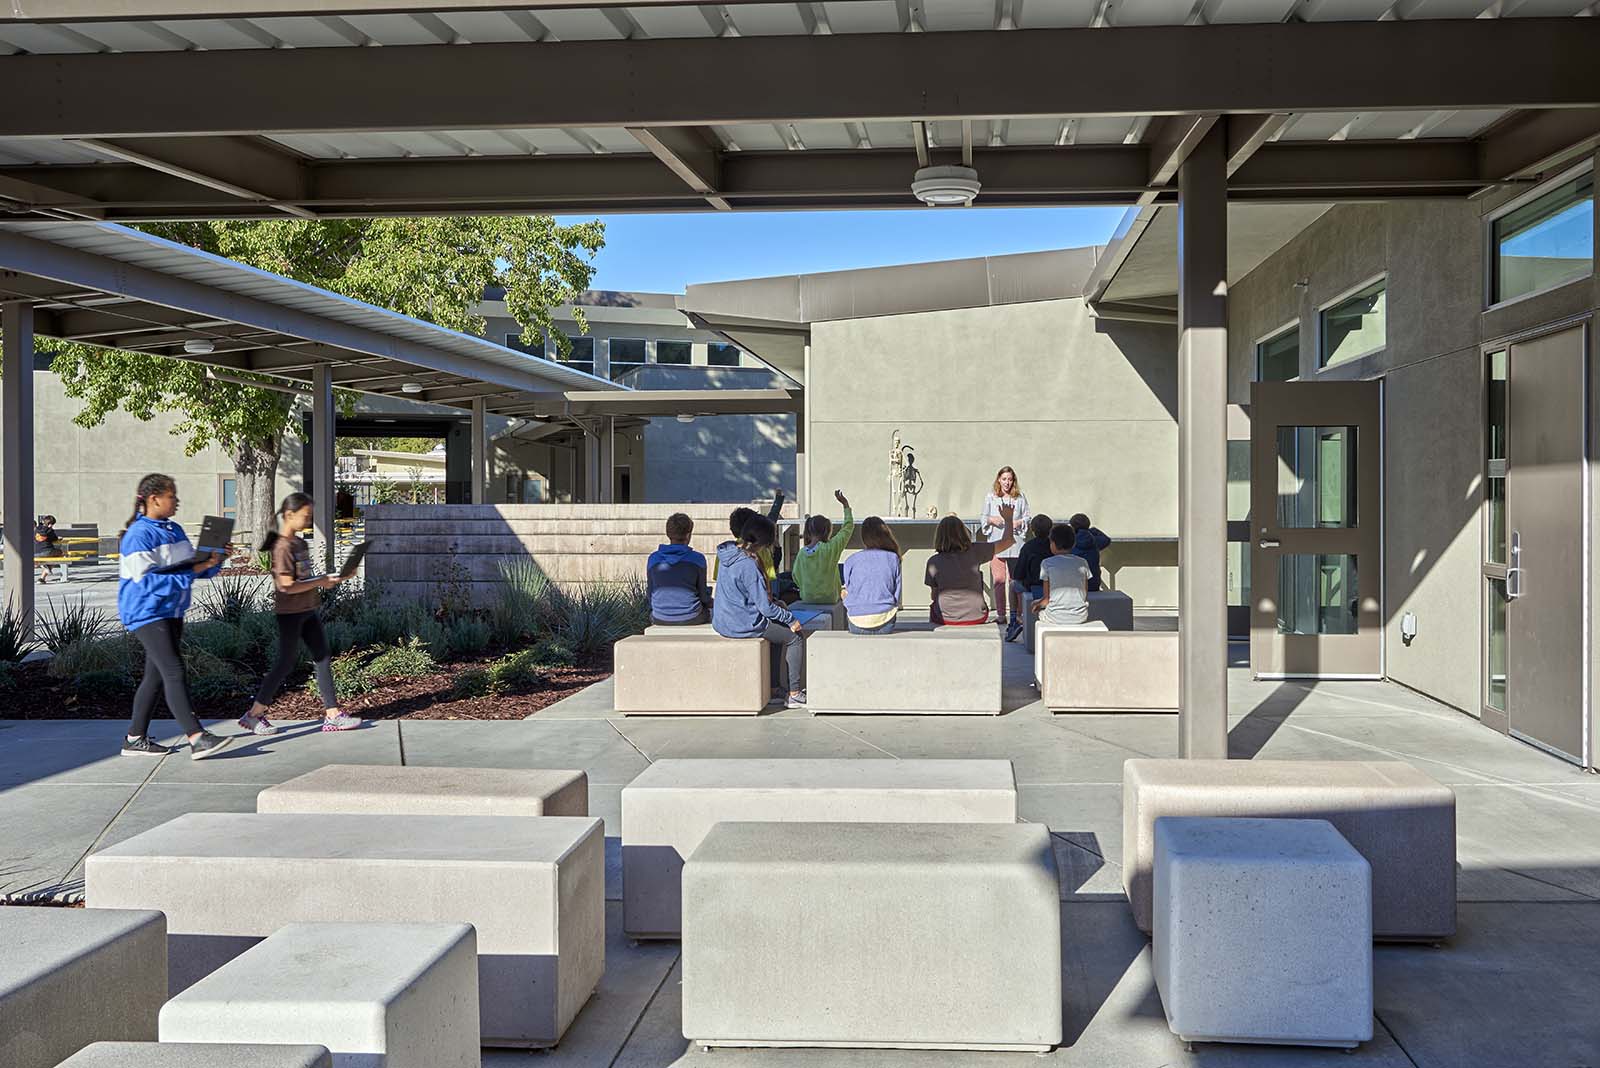 Outdoor sitting area with kids at Tice Creek School